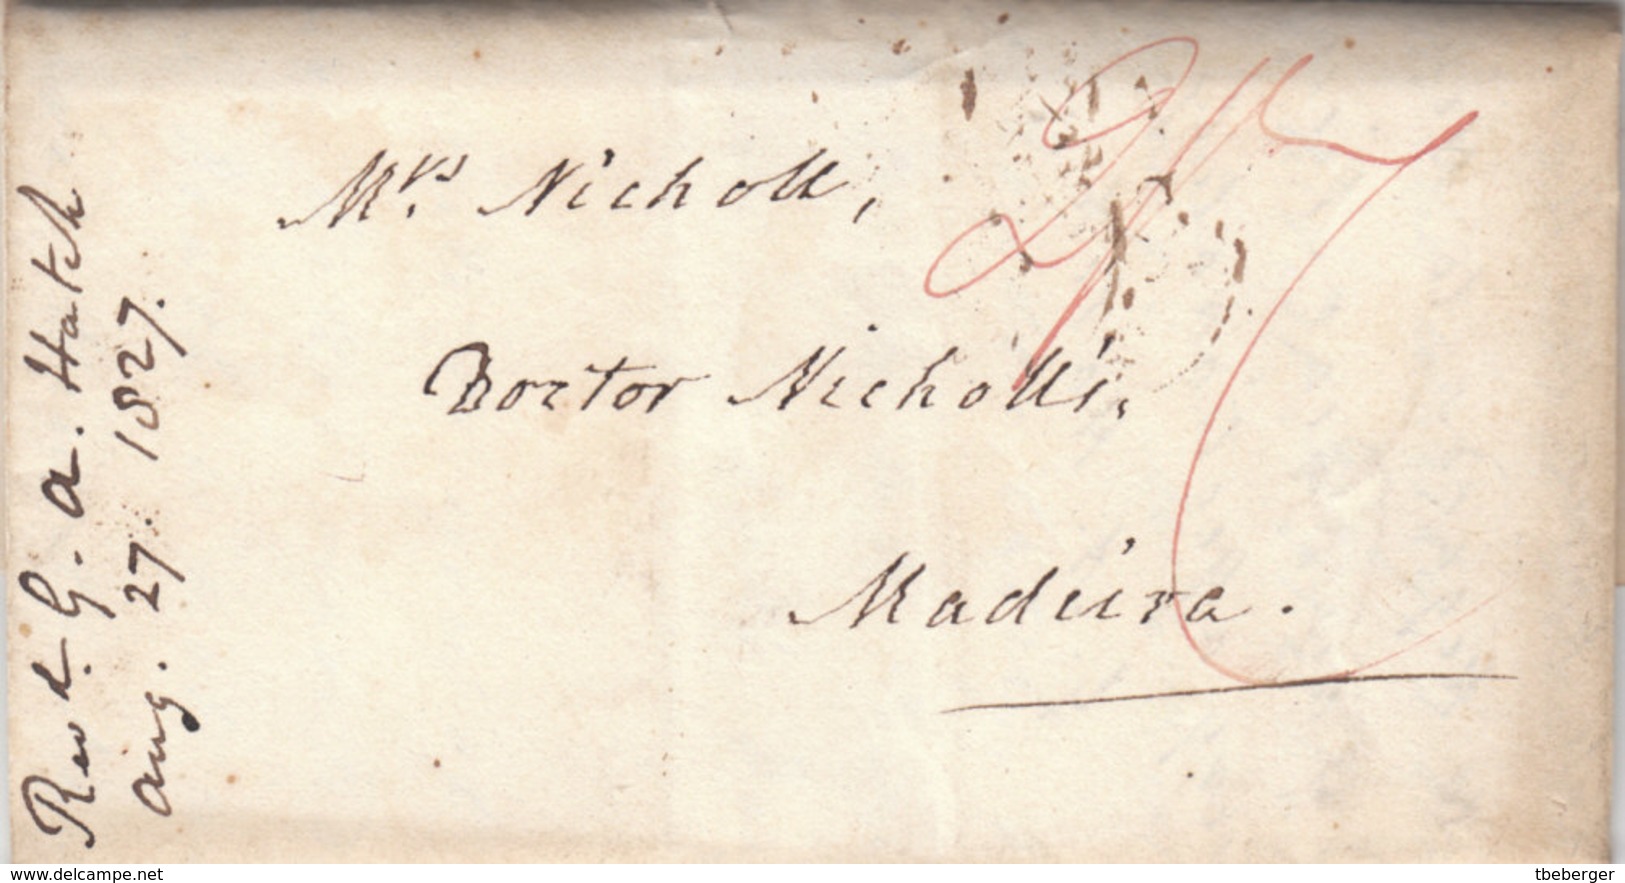 United Kingdom Madeira 1821/27 correspondence 7 entire letters London to Funchal (q191)